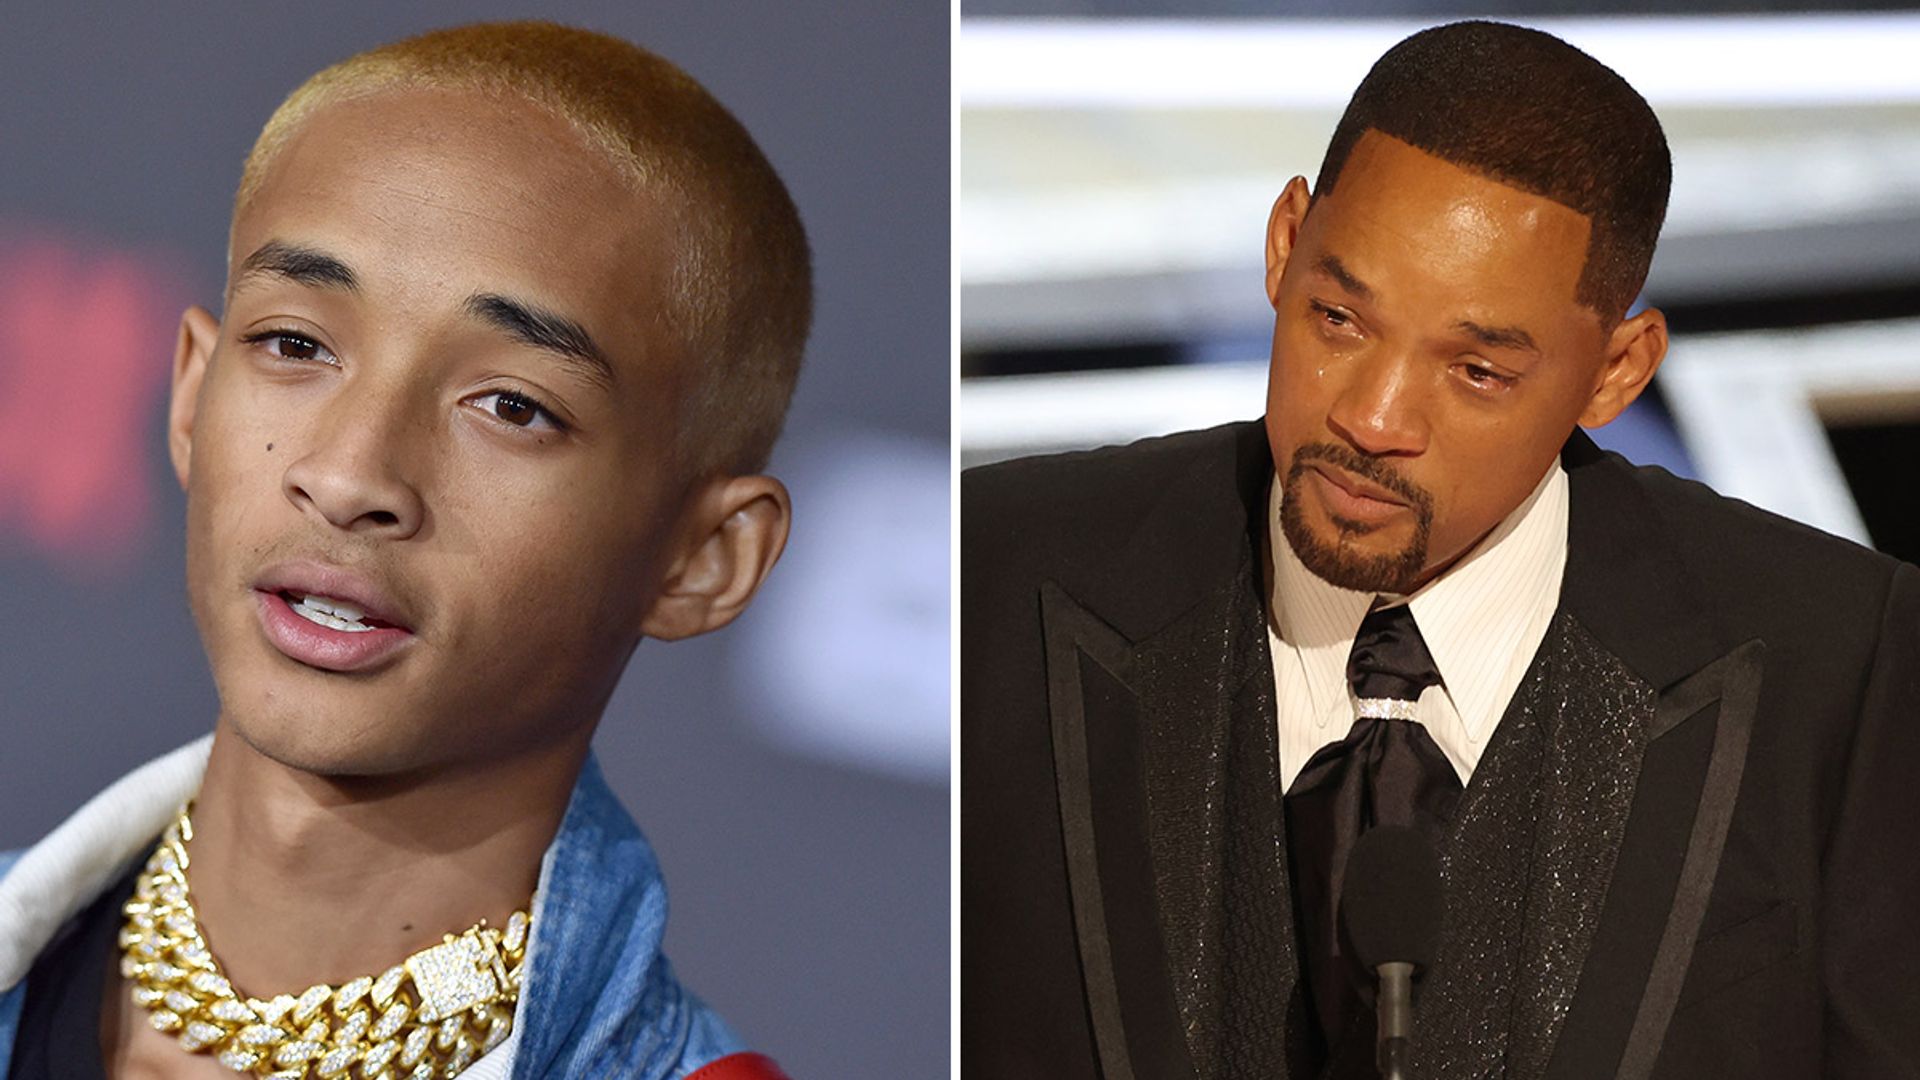 Oscars 2022 Jaden Smith Breaks Silence To Defend Dad Will After